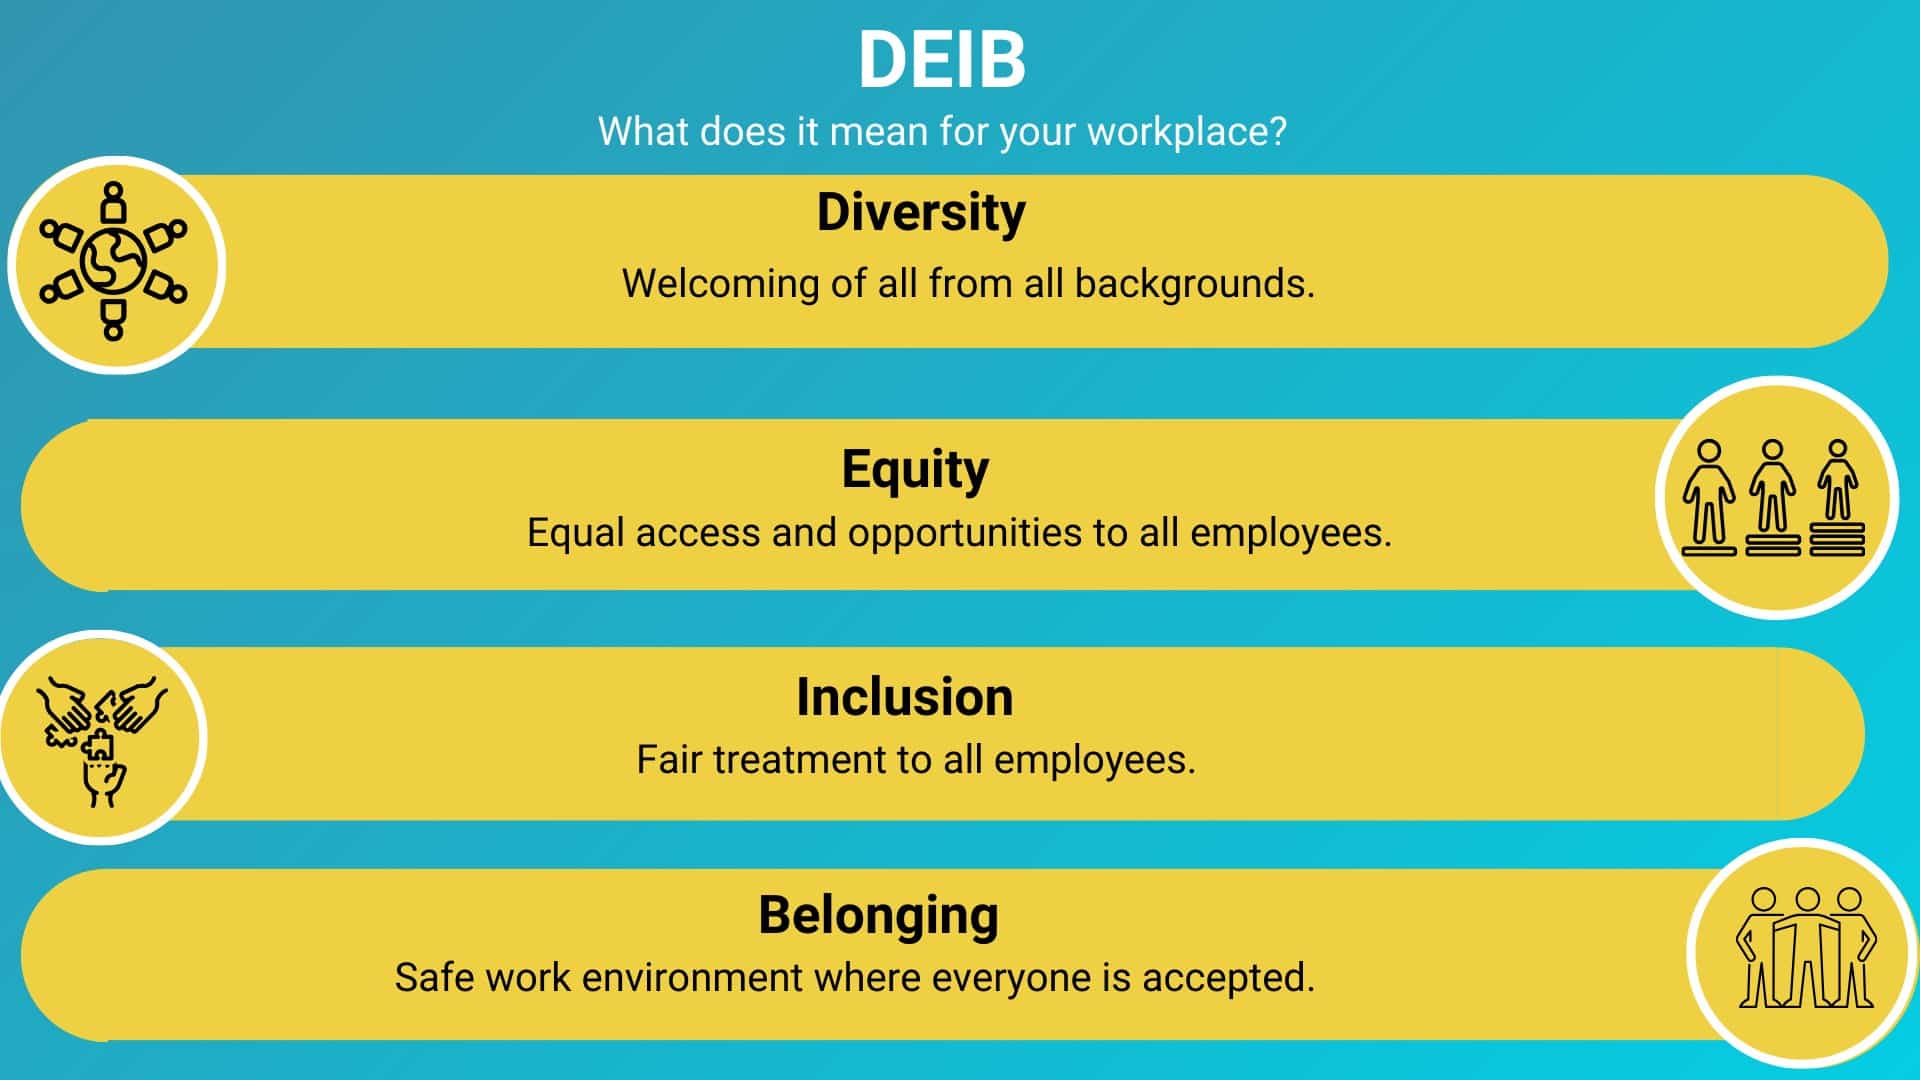 Defining DEIB: More Than Just Acronyms